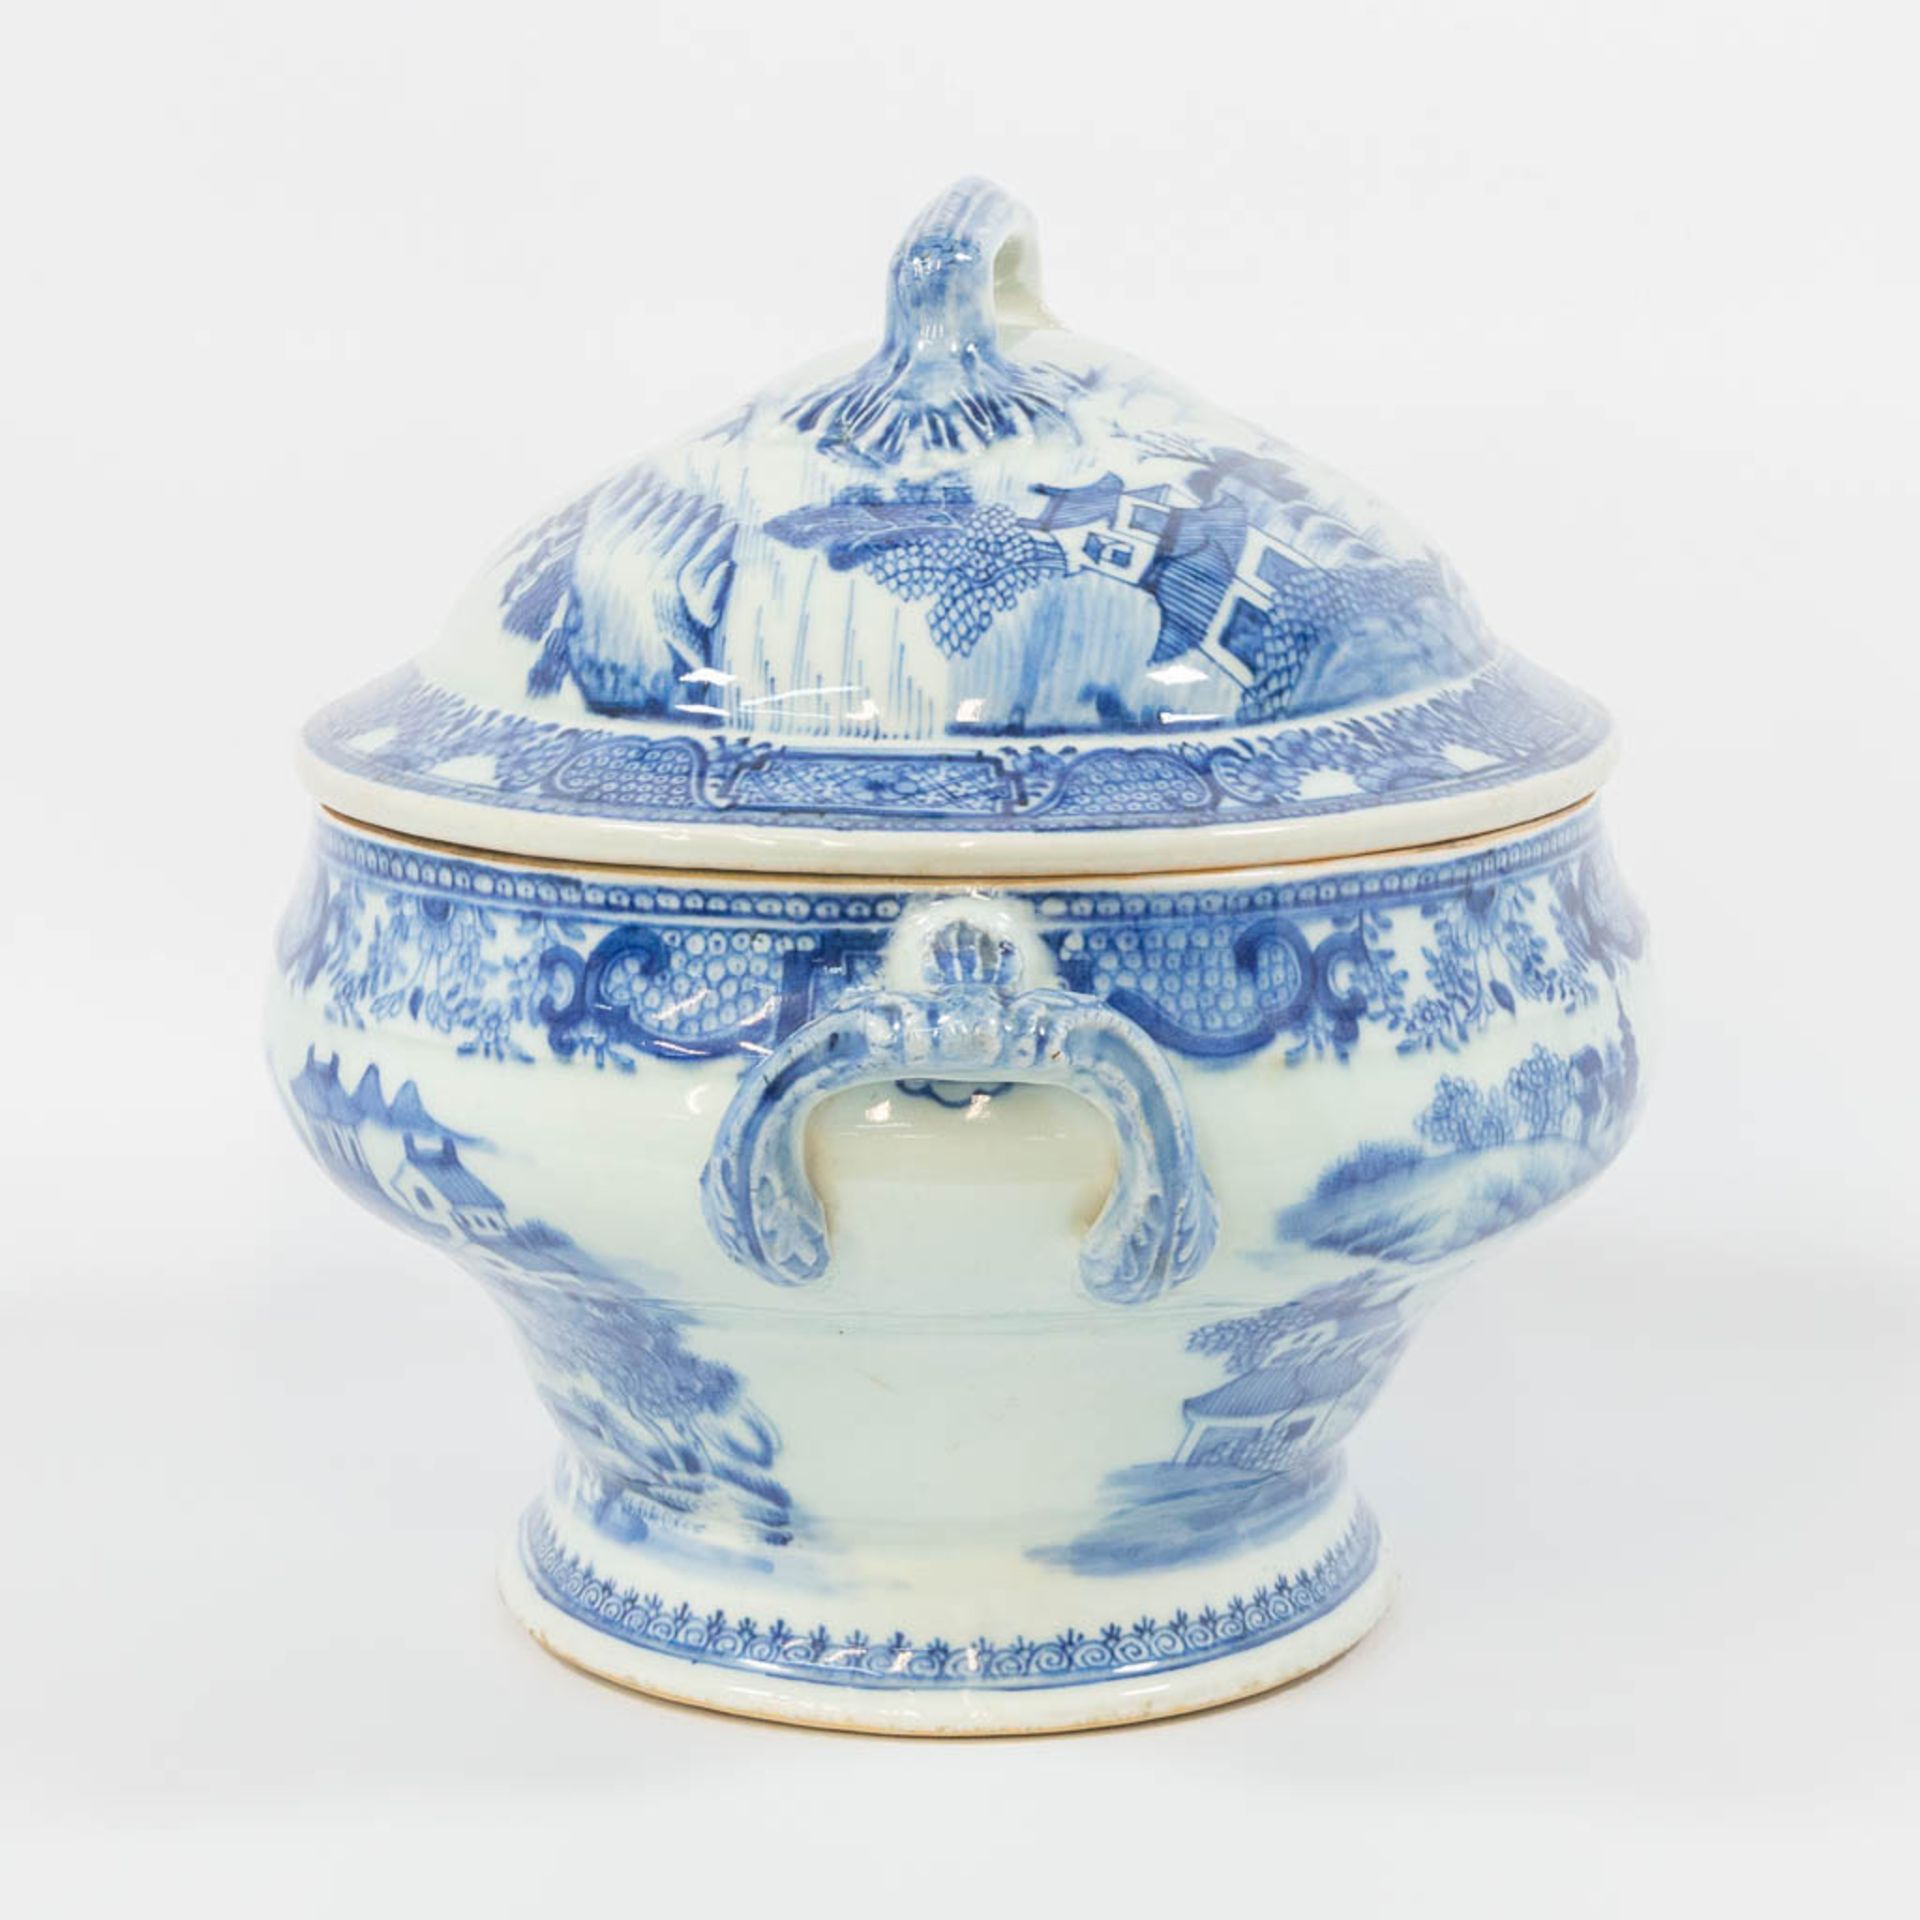 A large Chinese export porcelain blue and white tureen. 19th century. - Image 7 of 17